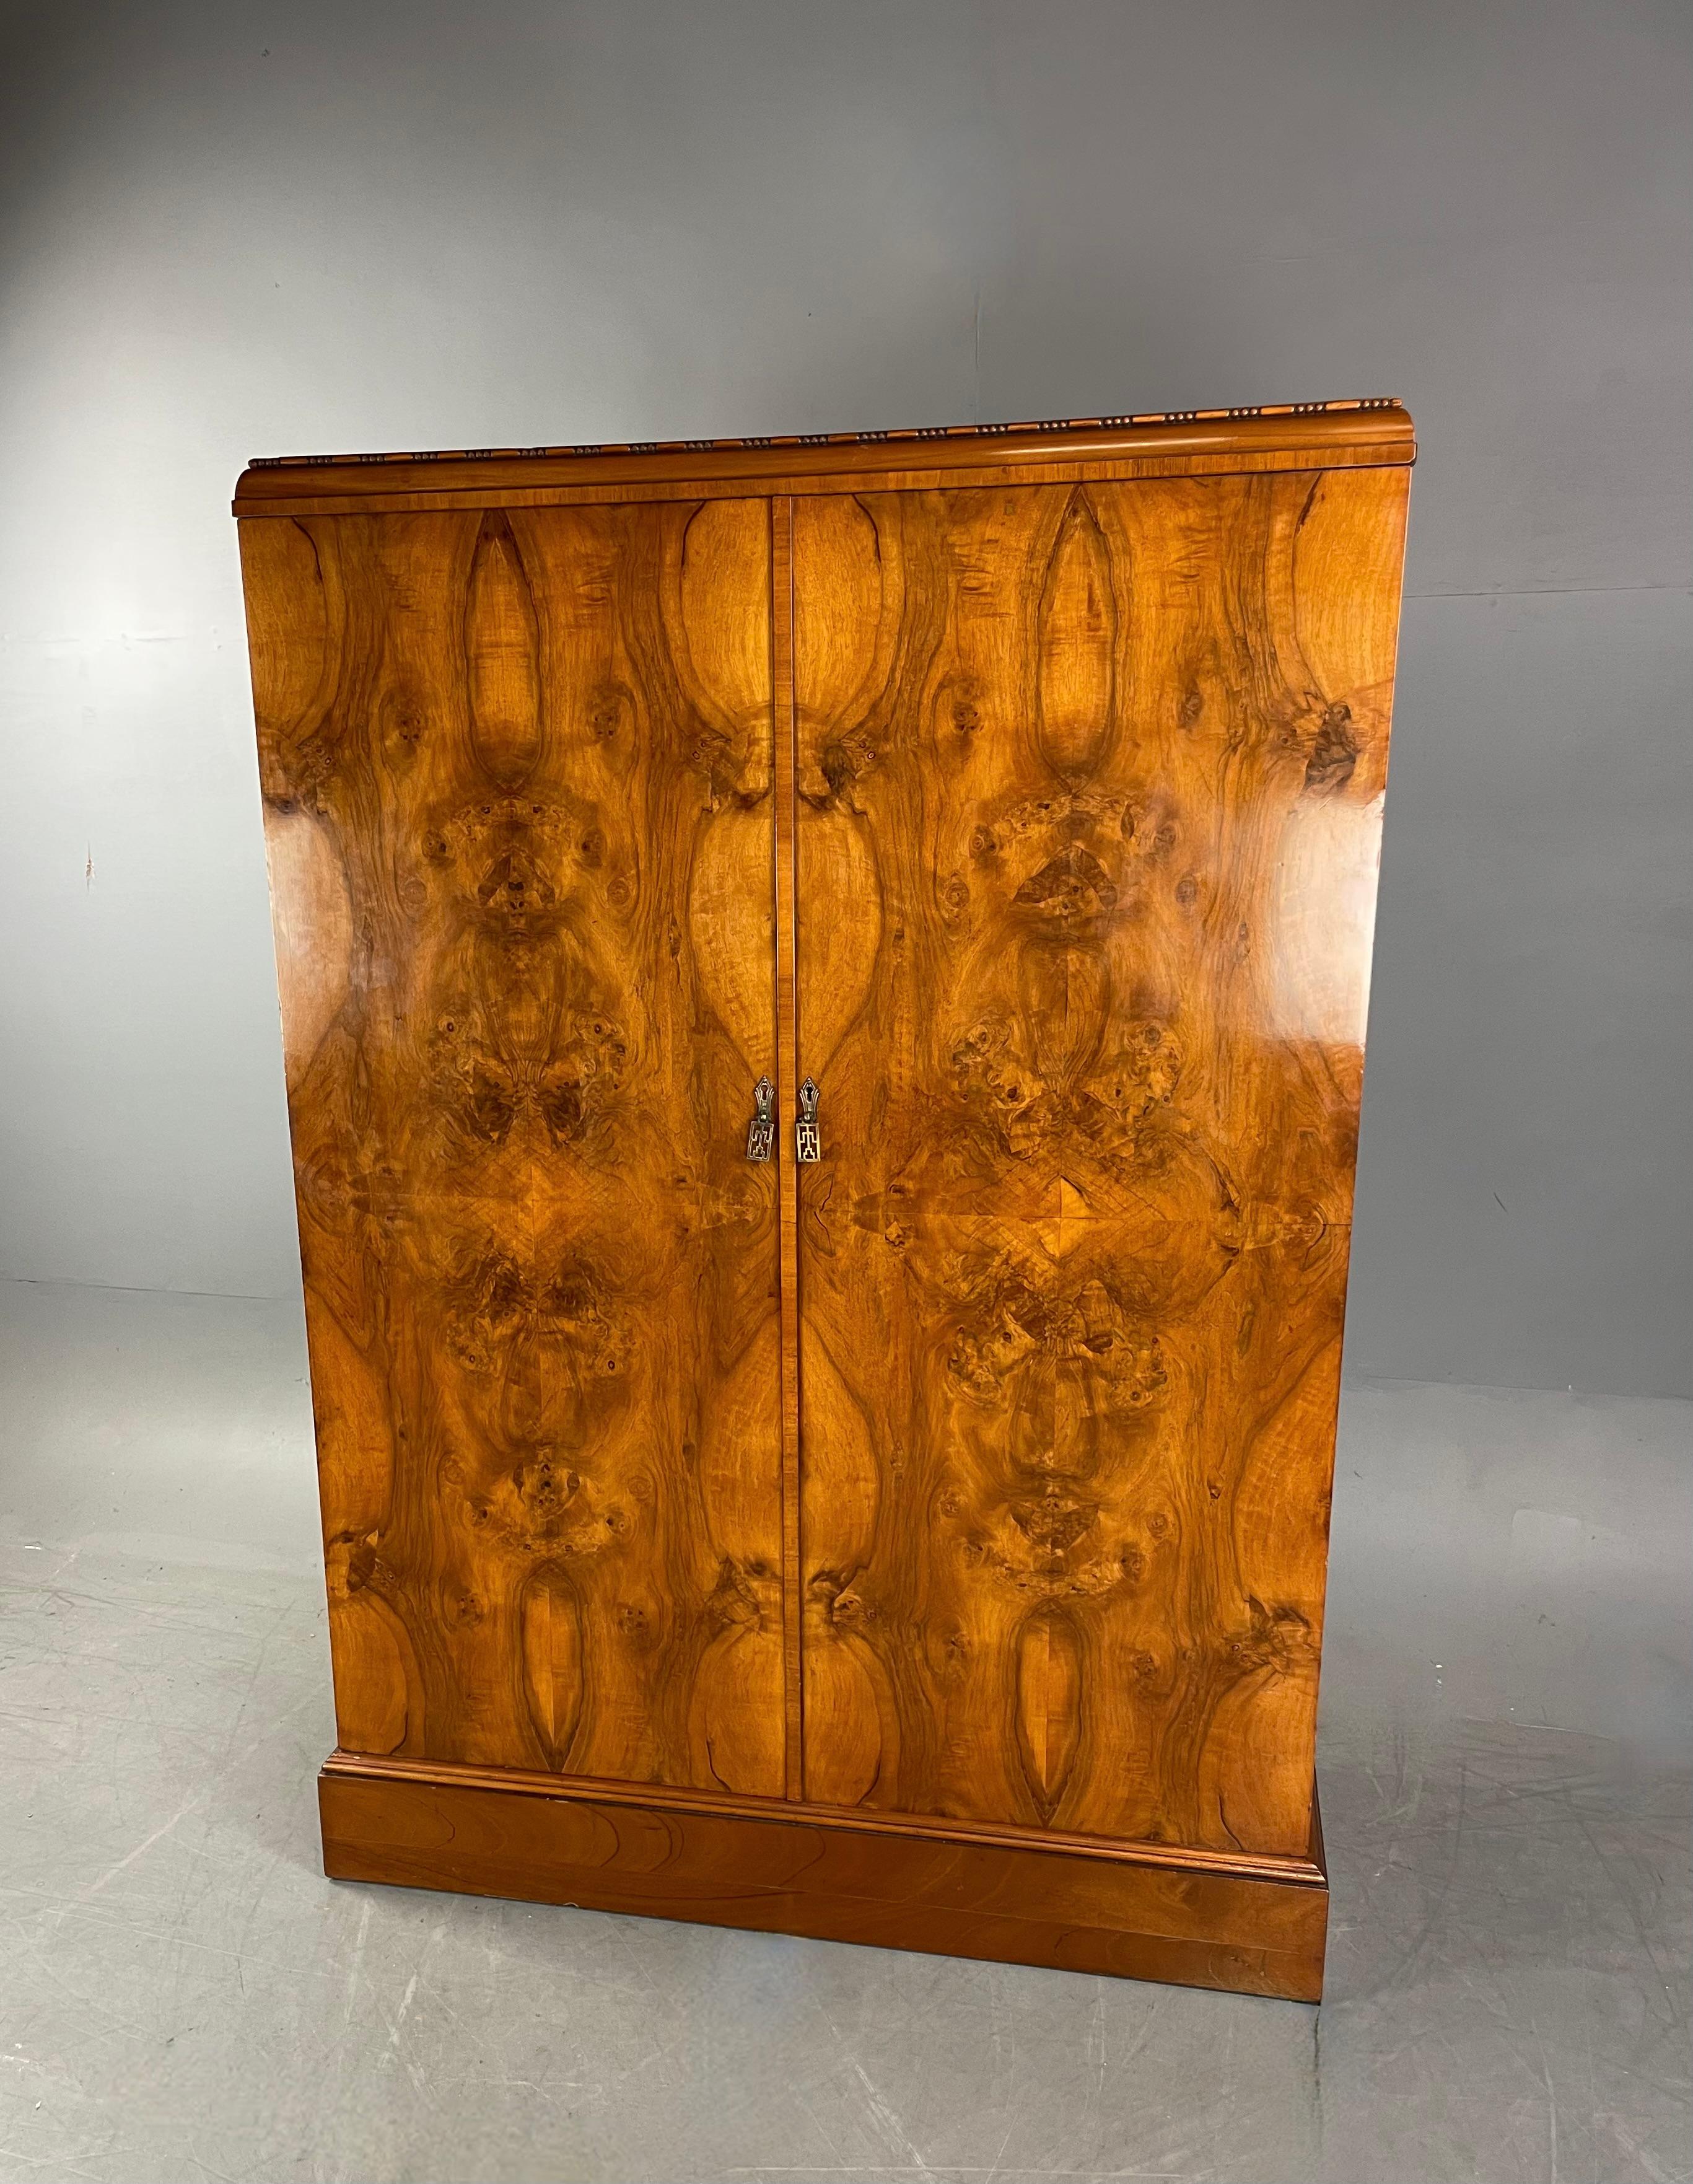 Original walnut compactom deep door gentleman’s fitted wardrobe model Y 
This iconic British made and designed wardrobe is in fantastic original condition 
The interior is fully fitted and retains all original labels and fittings 
The right hand